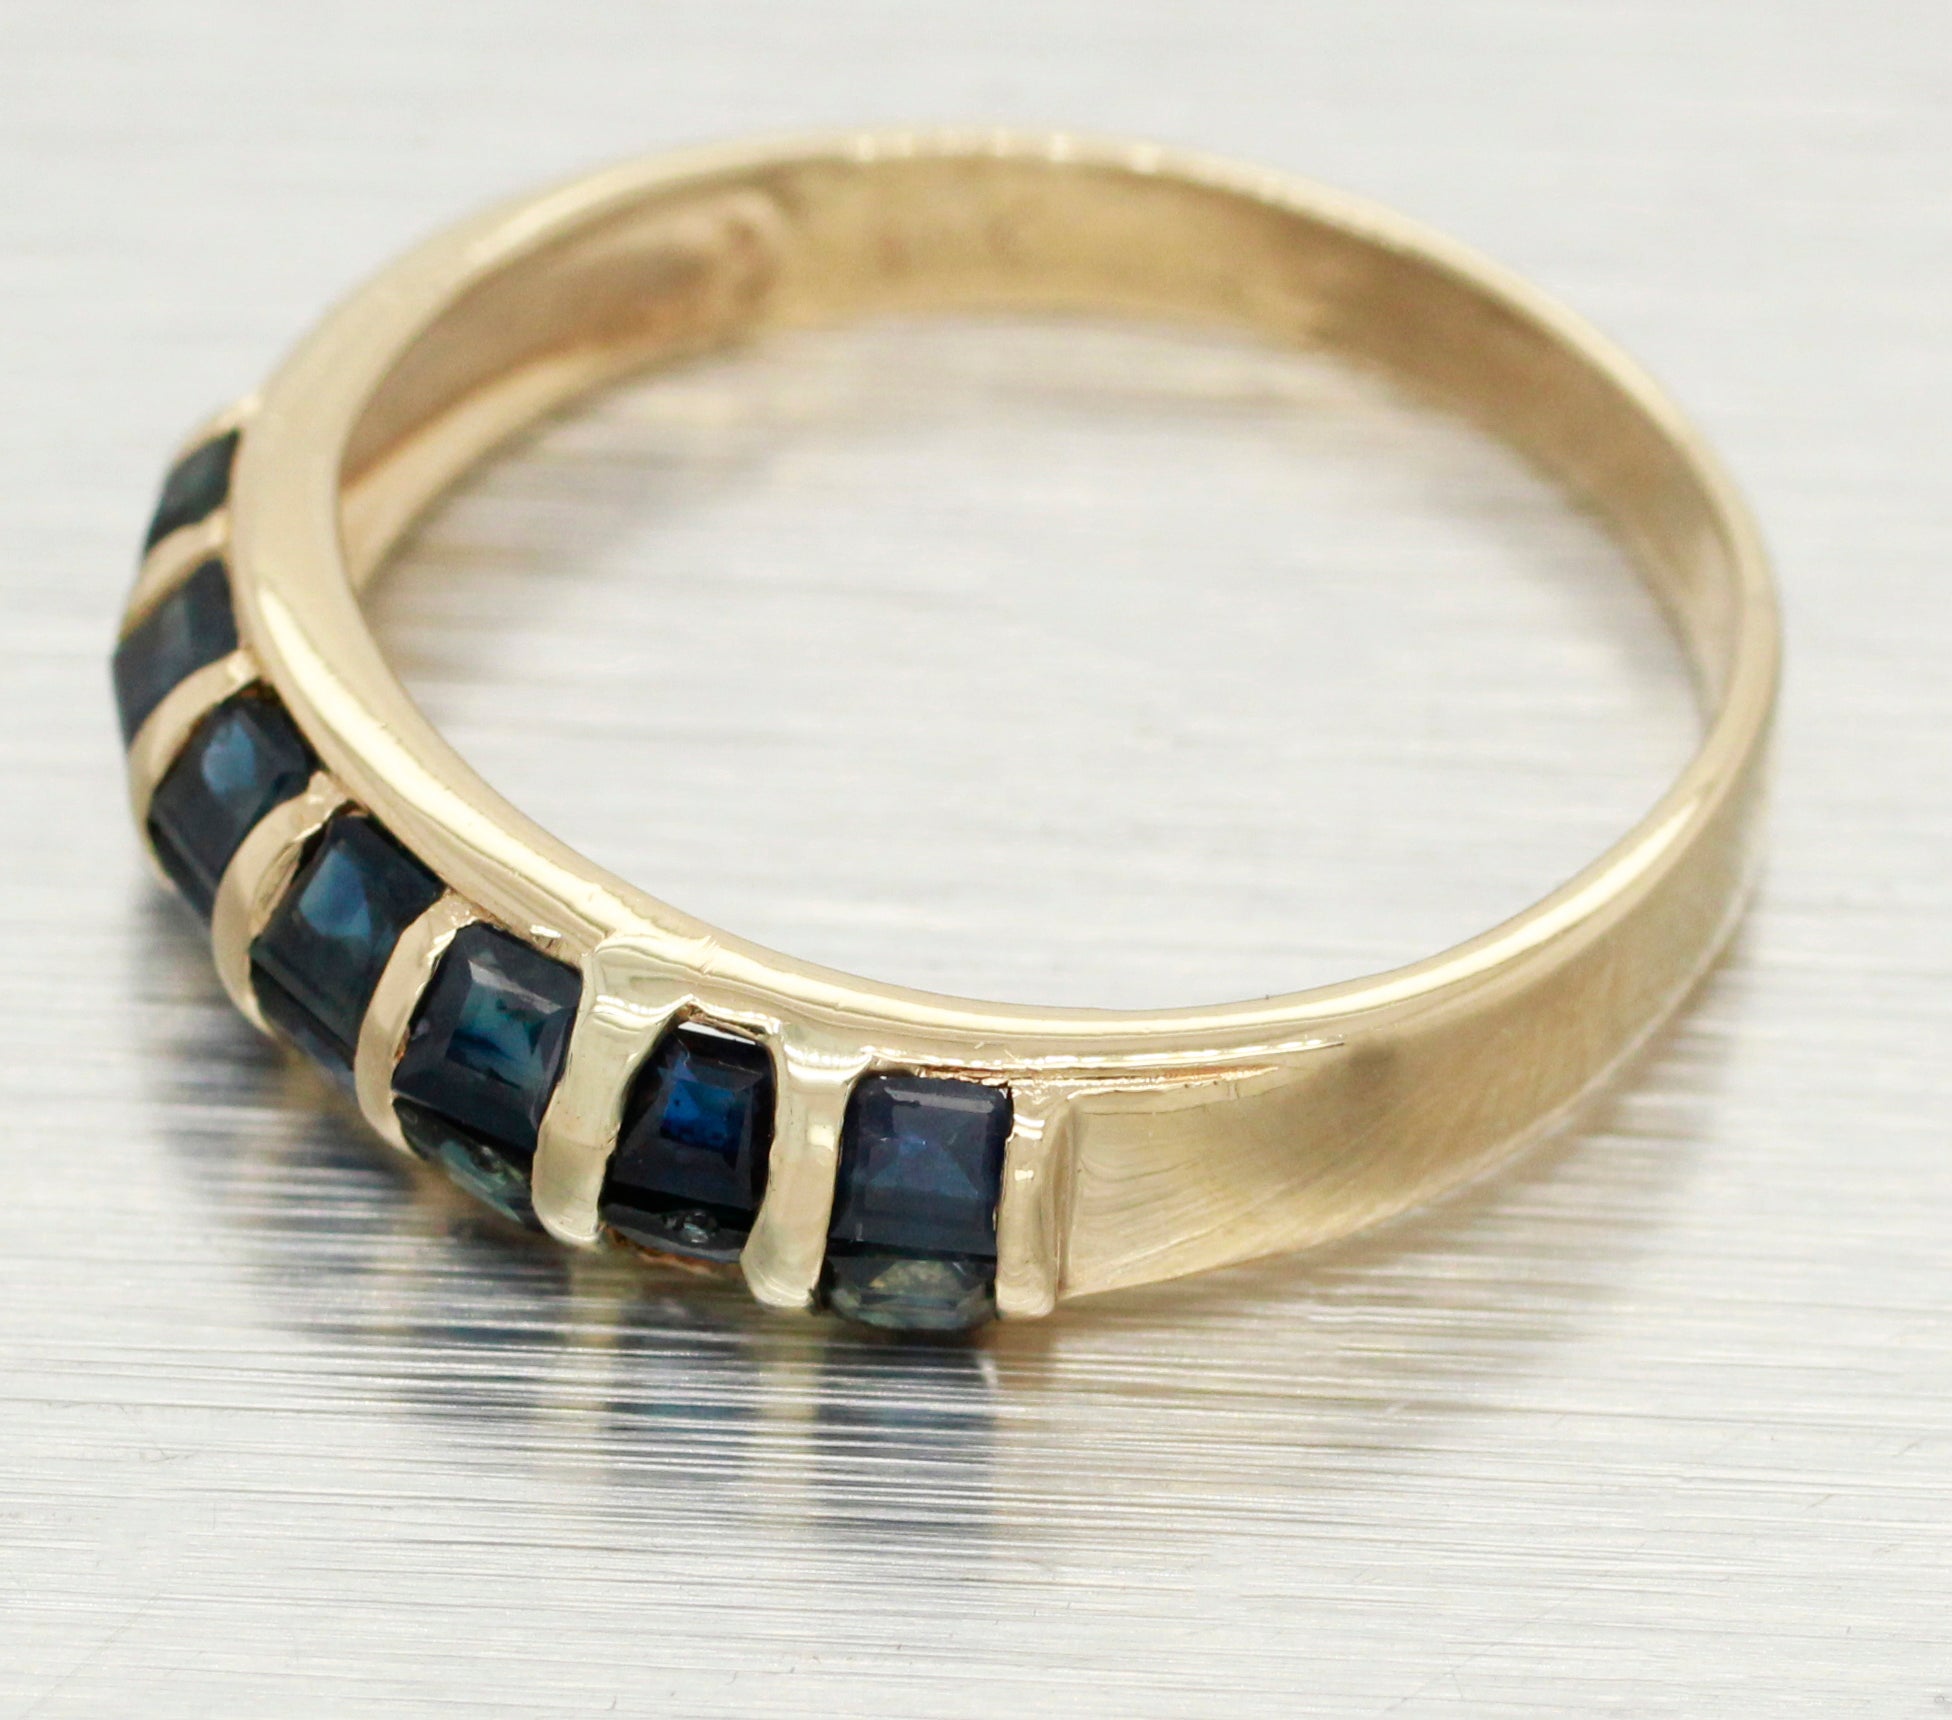 Vintage 0.80ctw Square Sapphire Band Ring - 14k Yellow Gold | Size 7.5